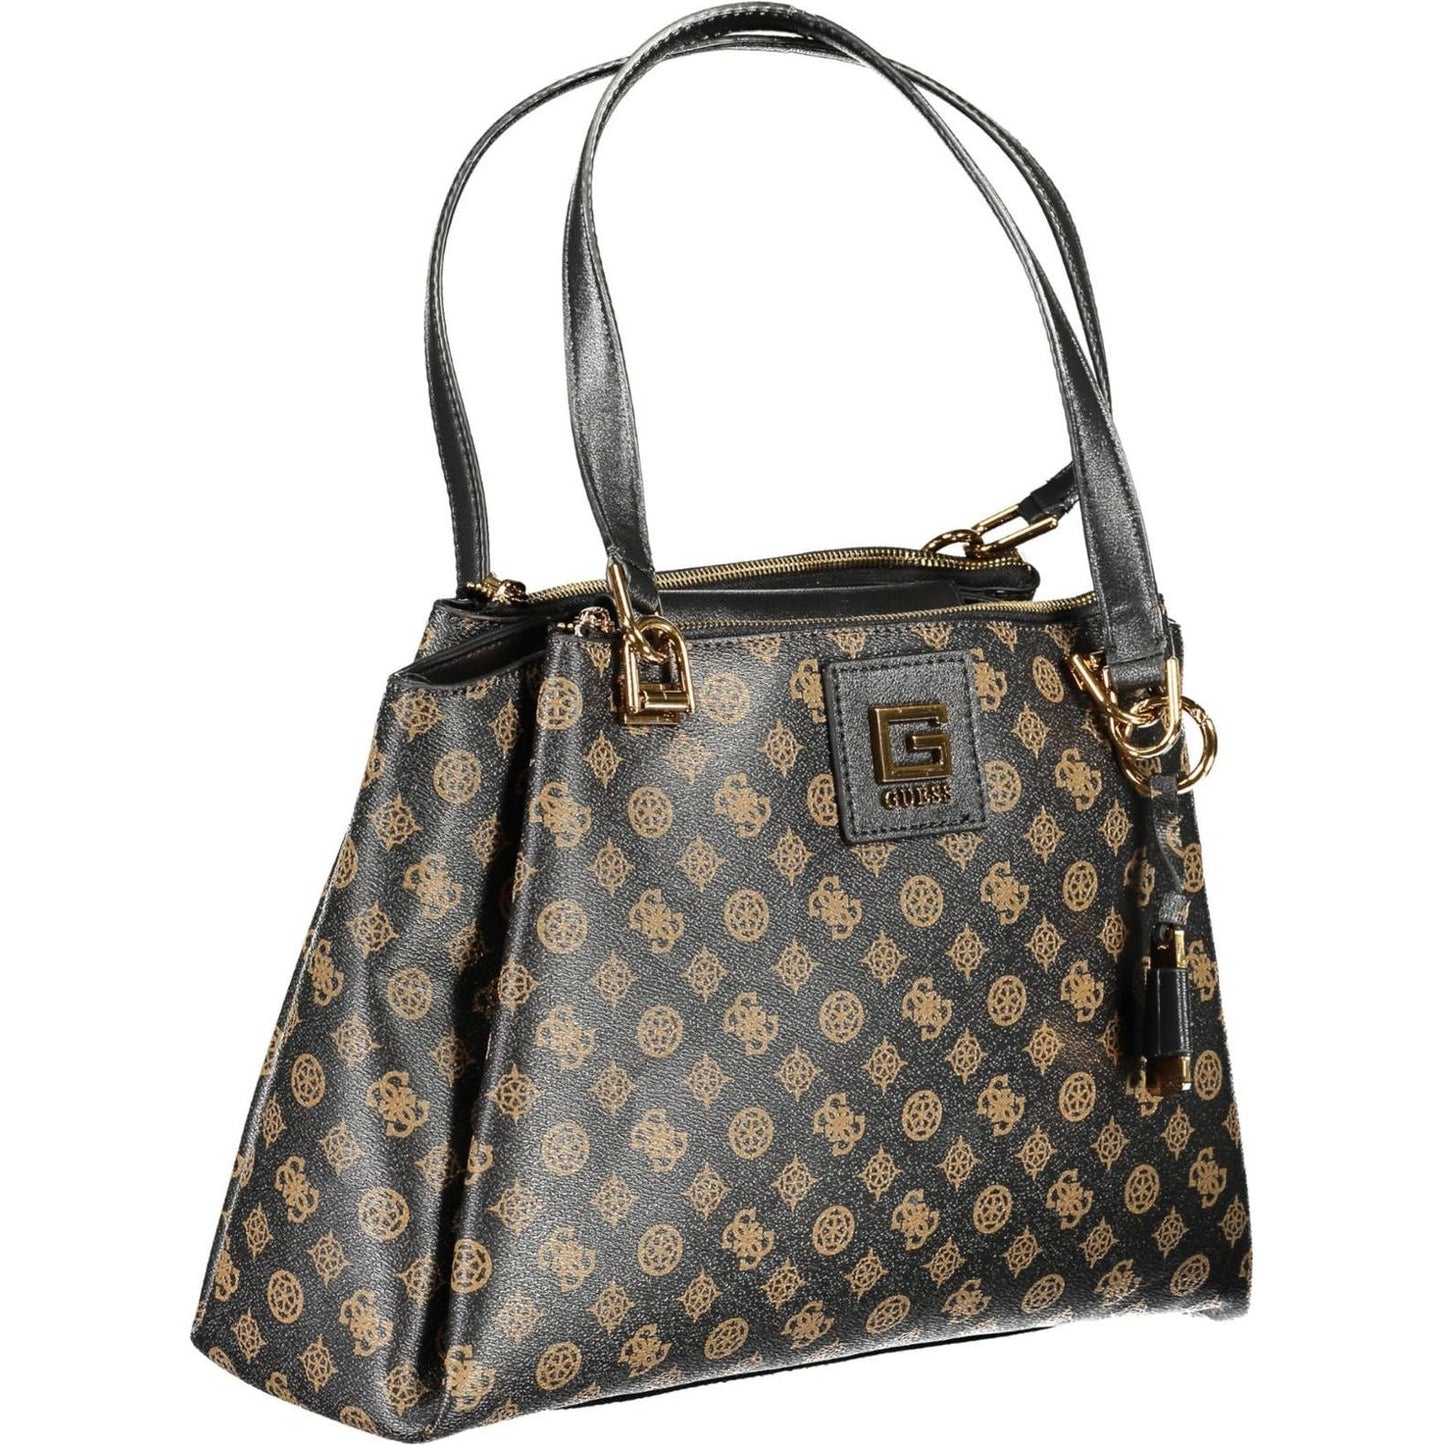 Guess Jeans Chic Brown Polyurethane Shoulder Bag chic-brown-polyurethane-shoulder-bag-1